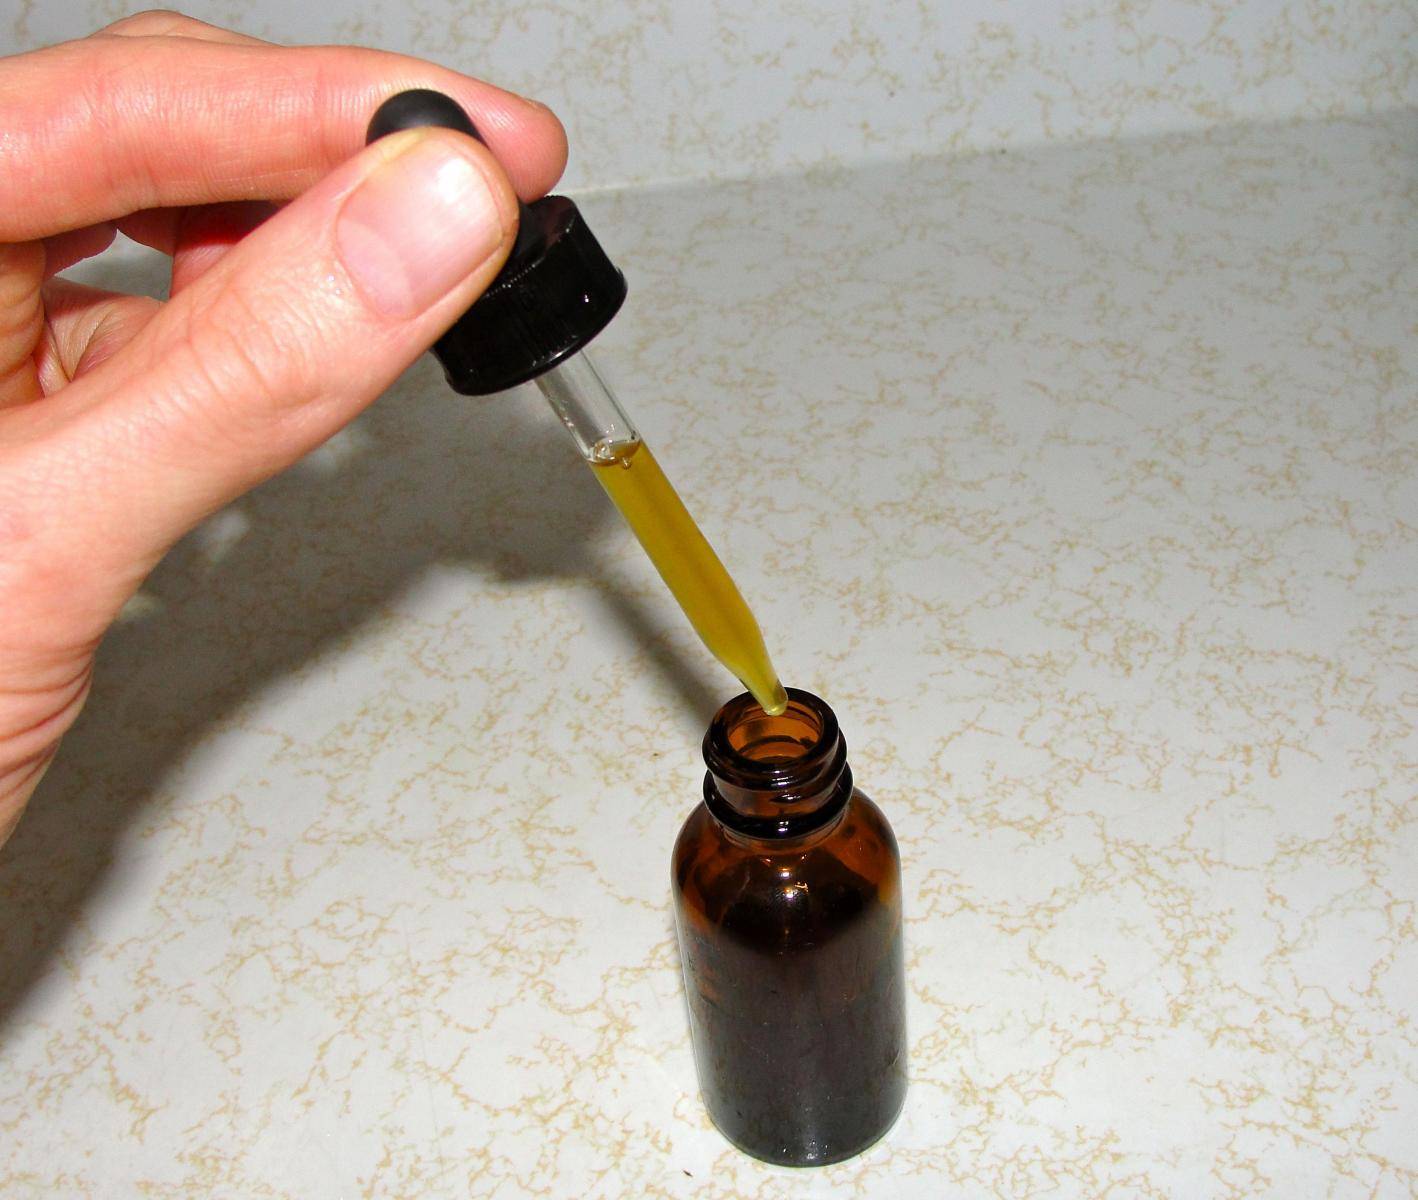 A hand bringing out a dropper filled with CBD oil from a bottle